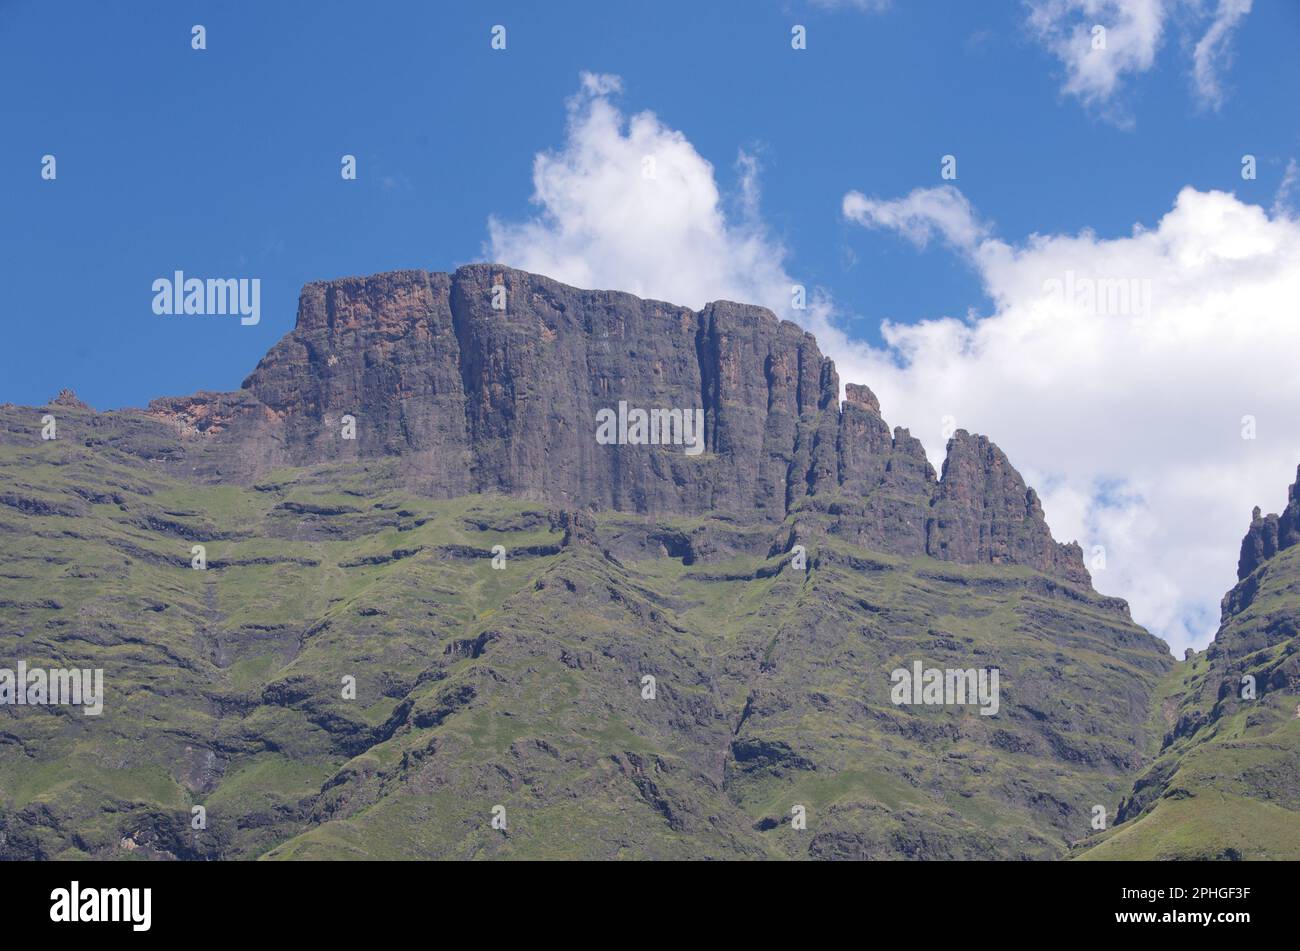 Cathkin Peak in Monks Cowl Nature Reserve, Drakensberg. A peak that is part of  one of South Africa's most iconic mountain ranges. Stock Photo